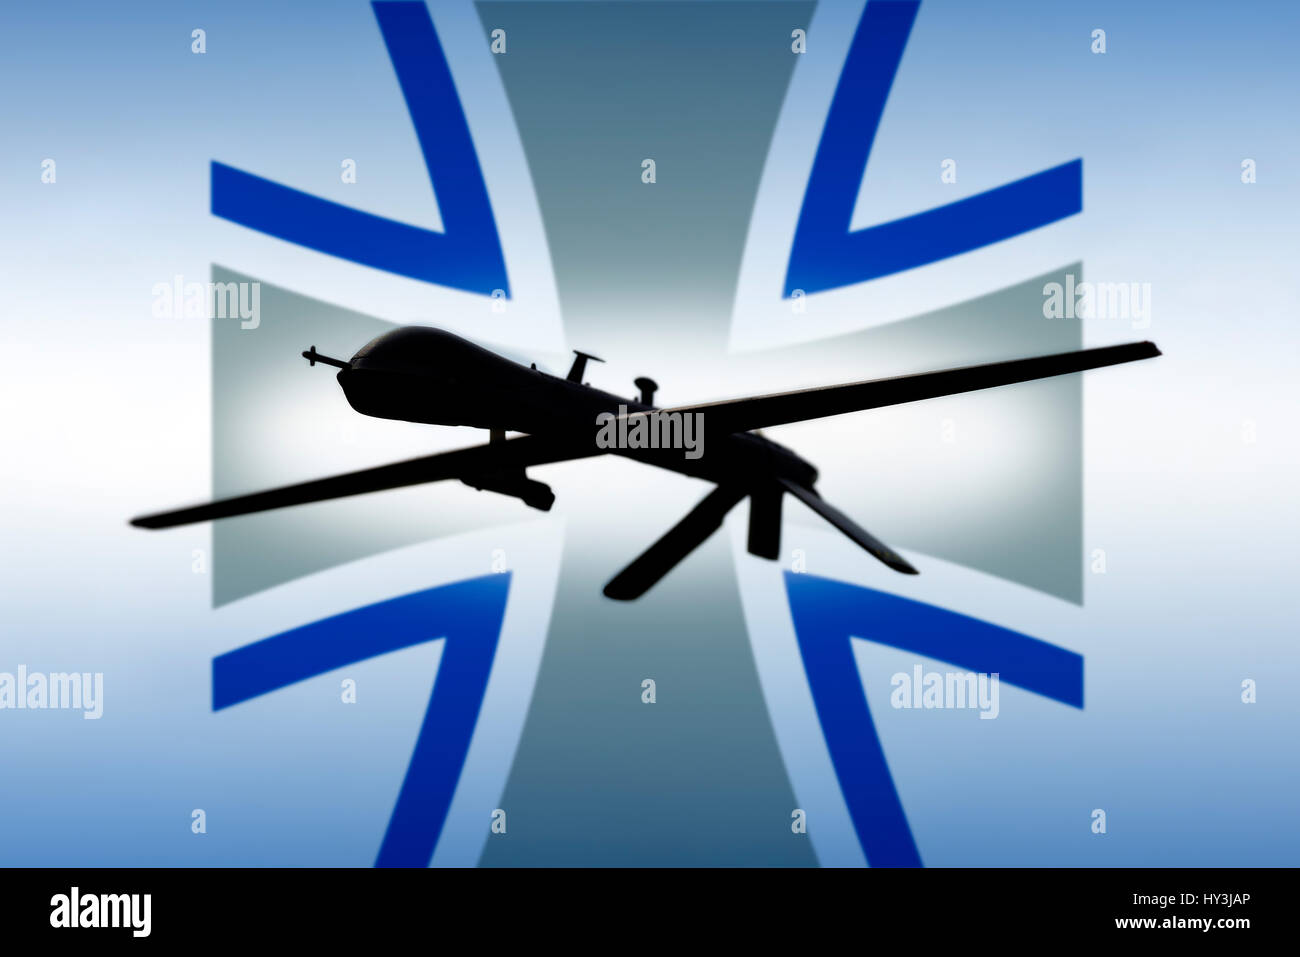 Drone and symbol of the armed forces, Drohne und Symbol der Bundeswehr Stock Photo